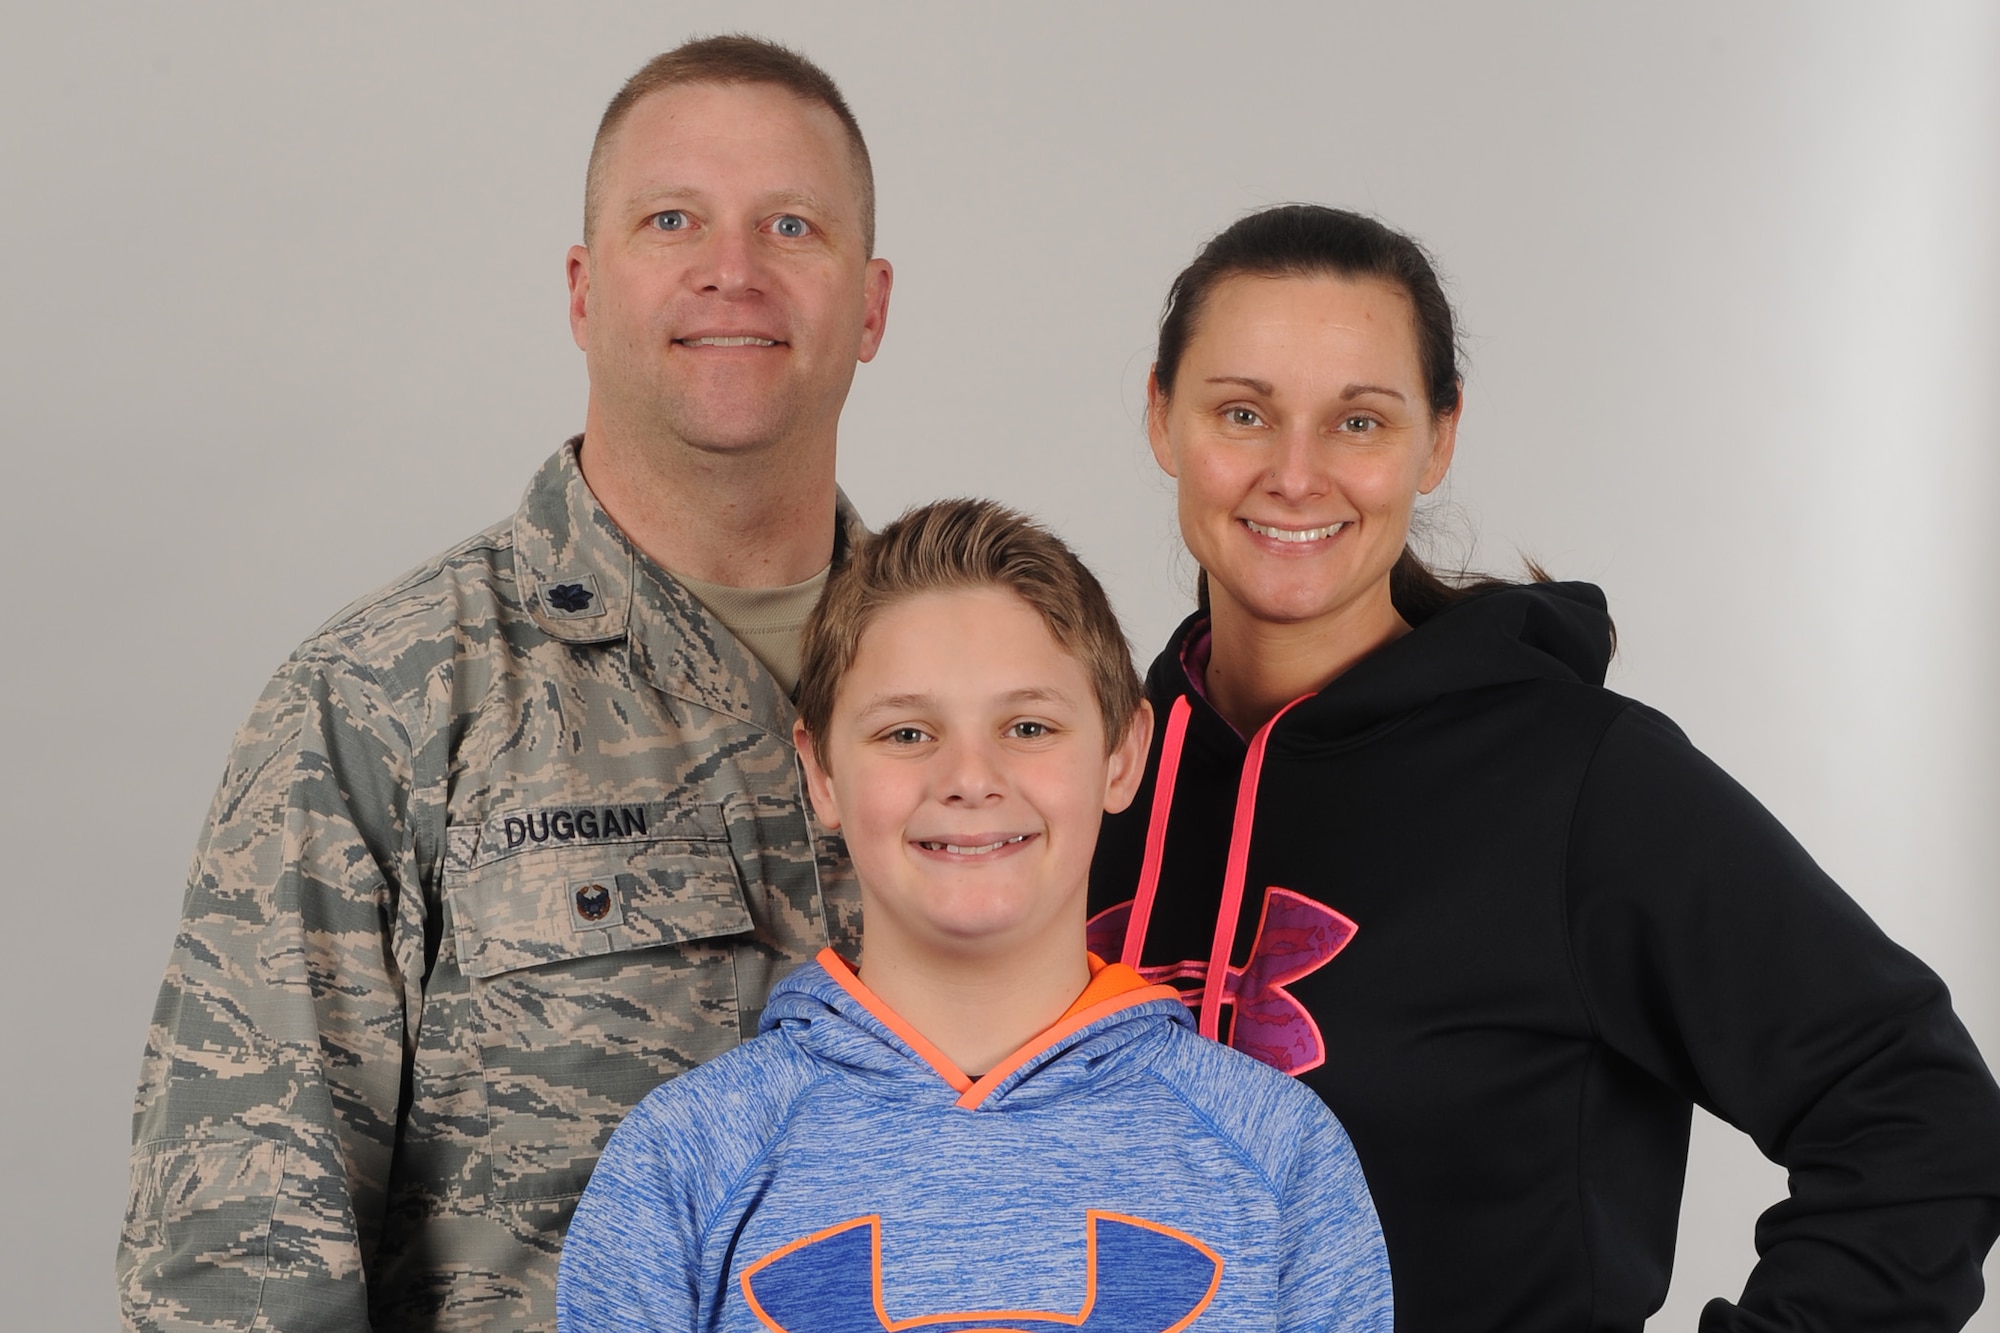 From left, Lt. Col. Jerrod Duggan, 341st Maintenance Group vice commander, his son Mason, and wife Kimberly, pose for a portrait April 2, 2018, at Malmstrom Air Force Base, Mont.